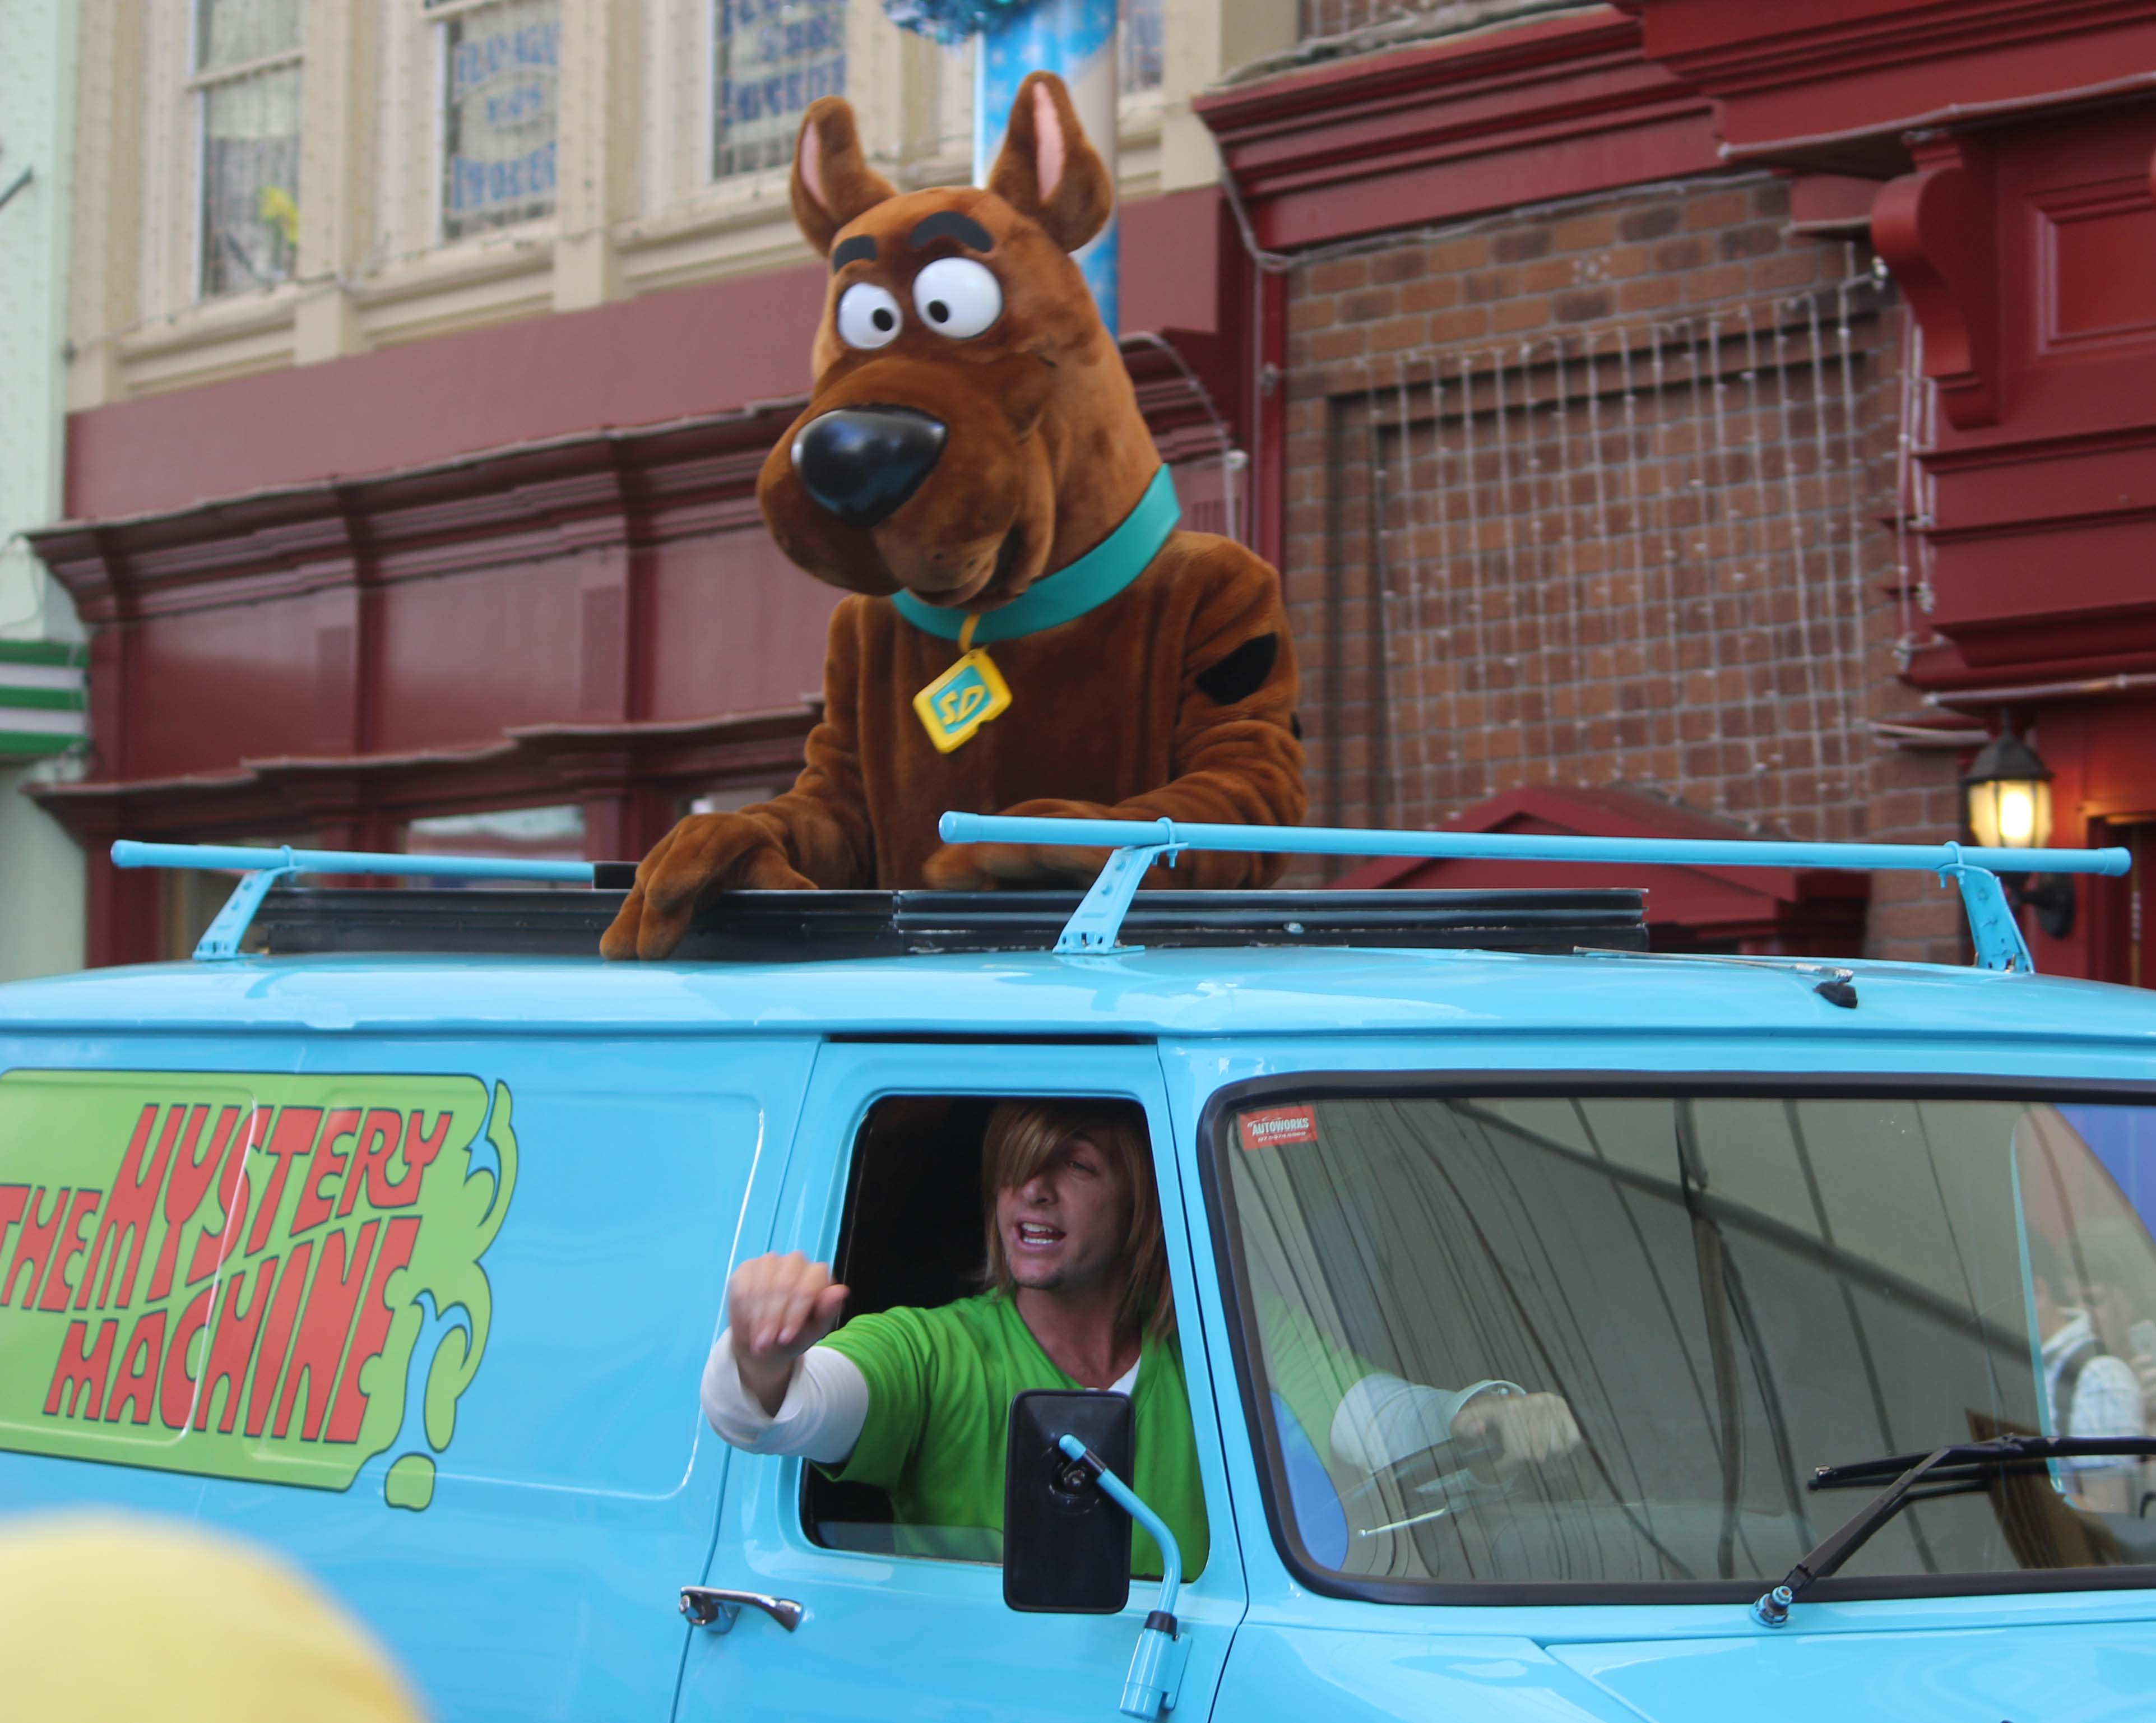 Scooby Doo & Shaggy are both cool costume ideas that begin with the letter S